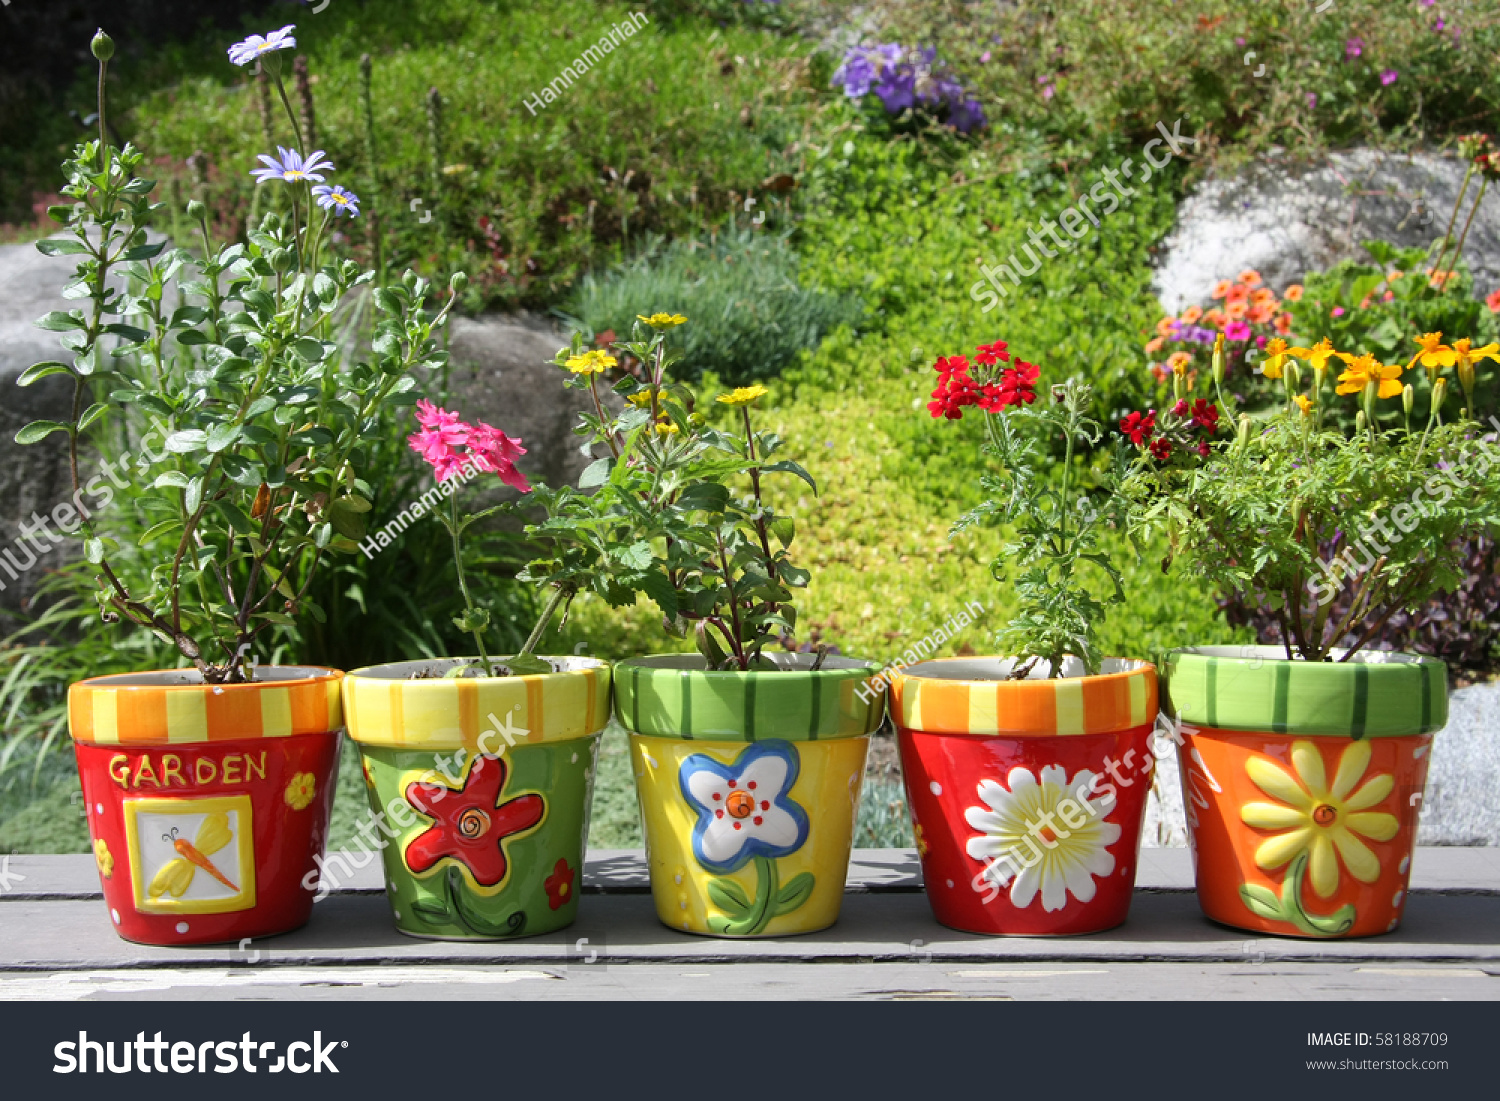 Colorful pots with pretty flowers, outside in the garden. #58188709